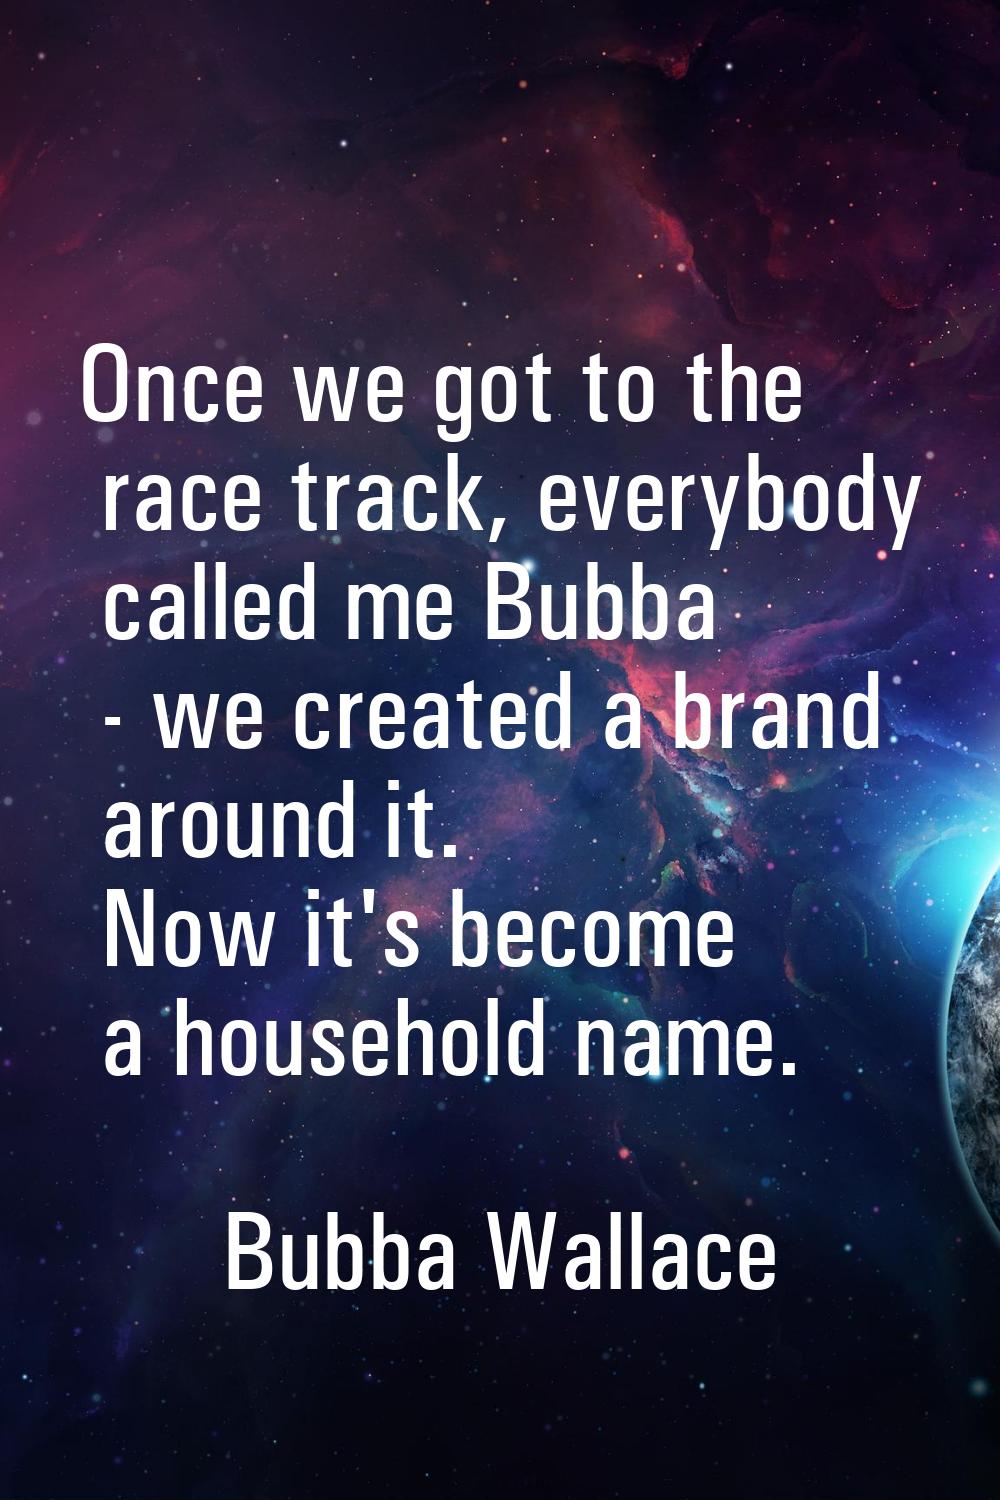 Once we got to the race track, everybody called me Bubba - we created a brand around it. Now it's b